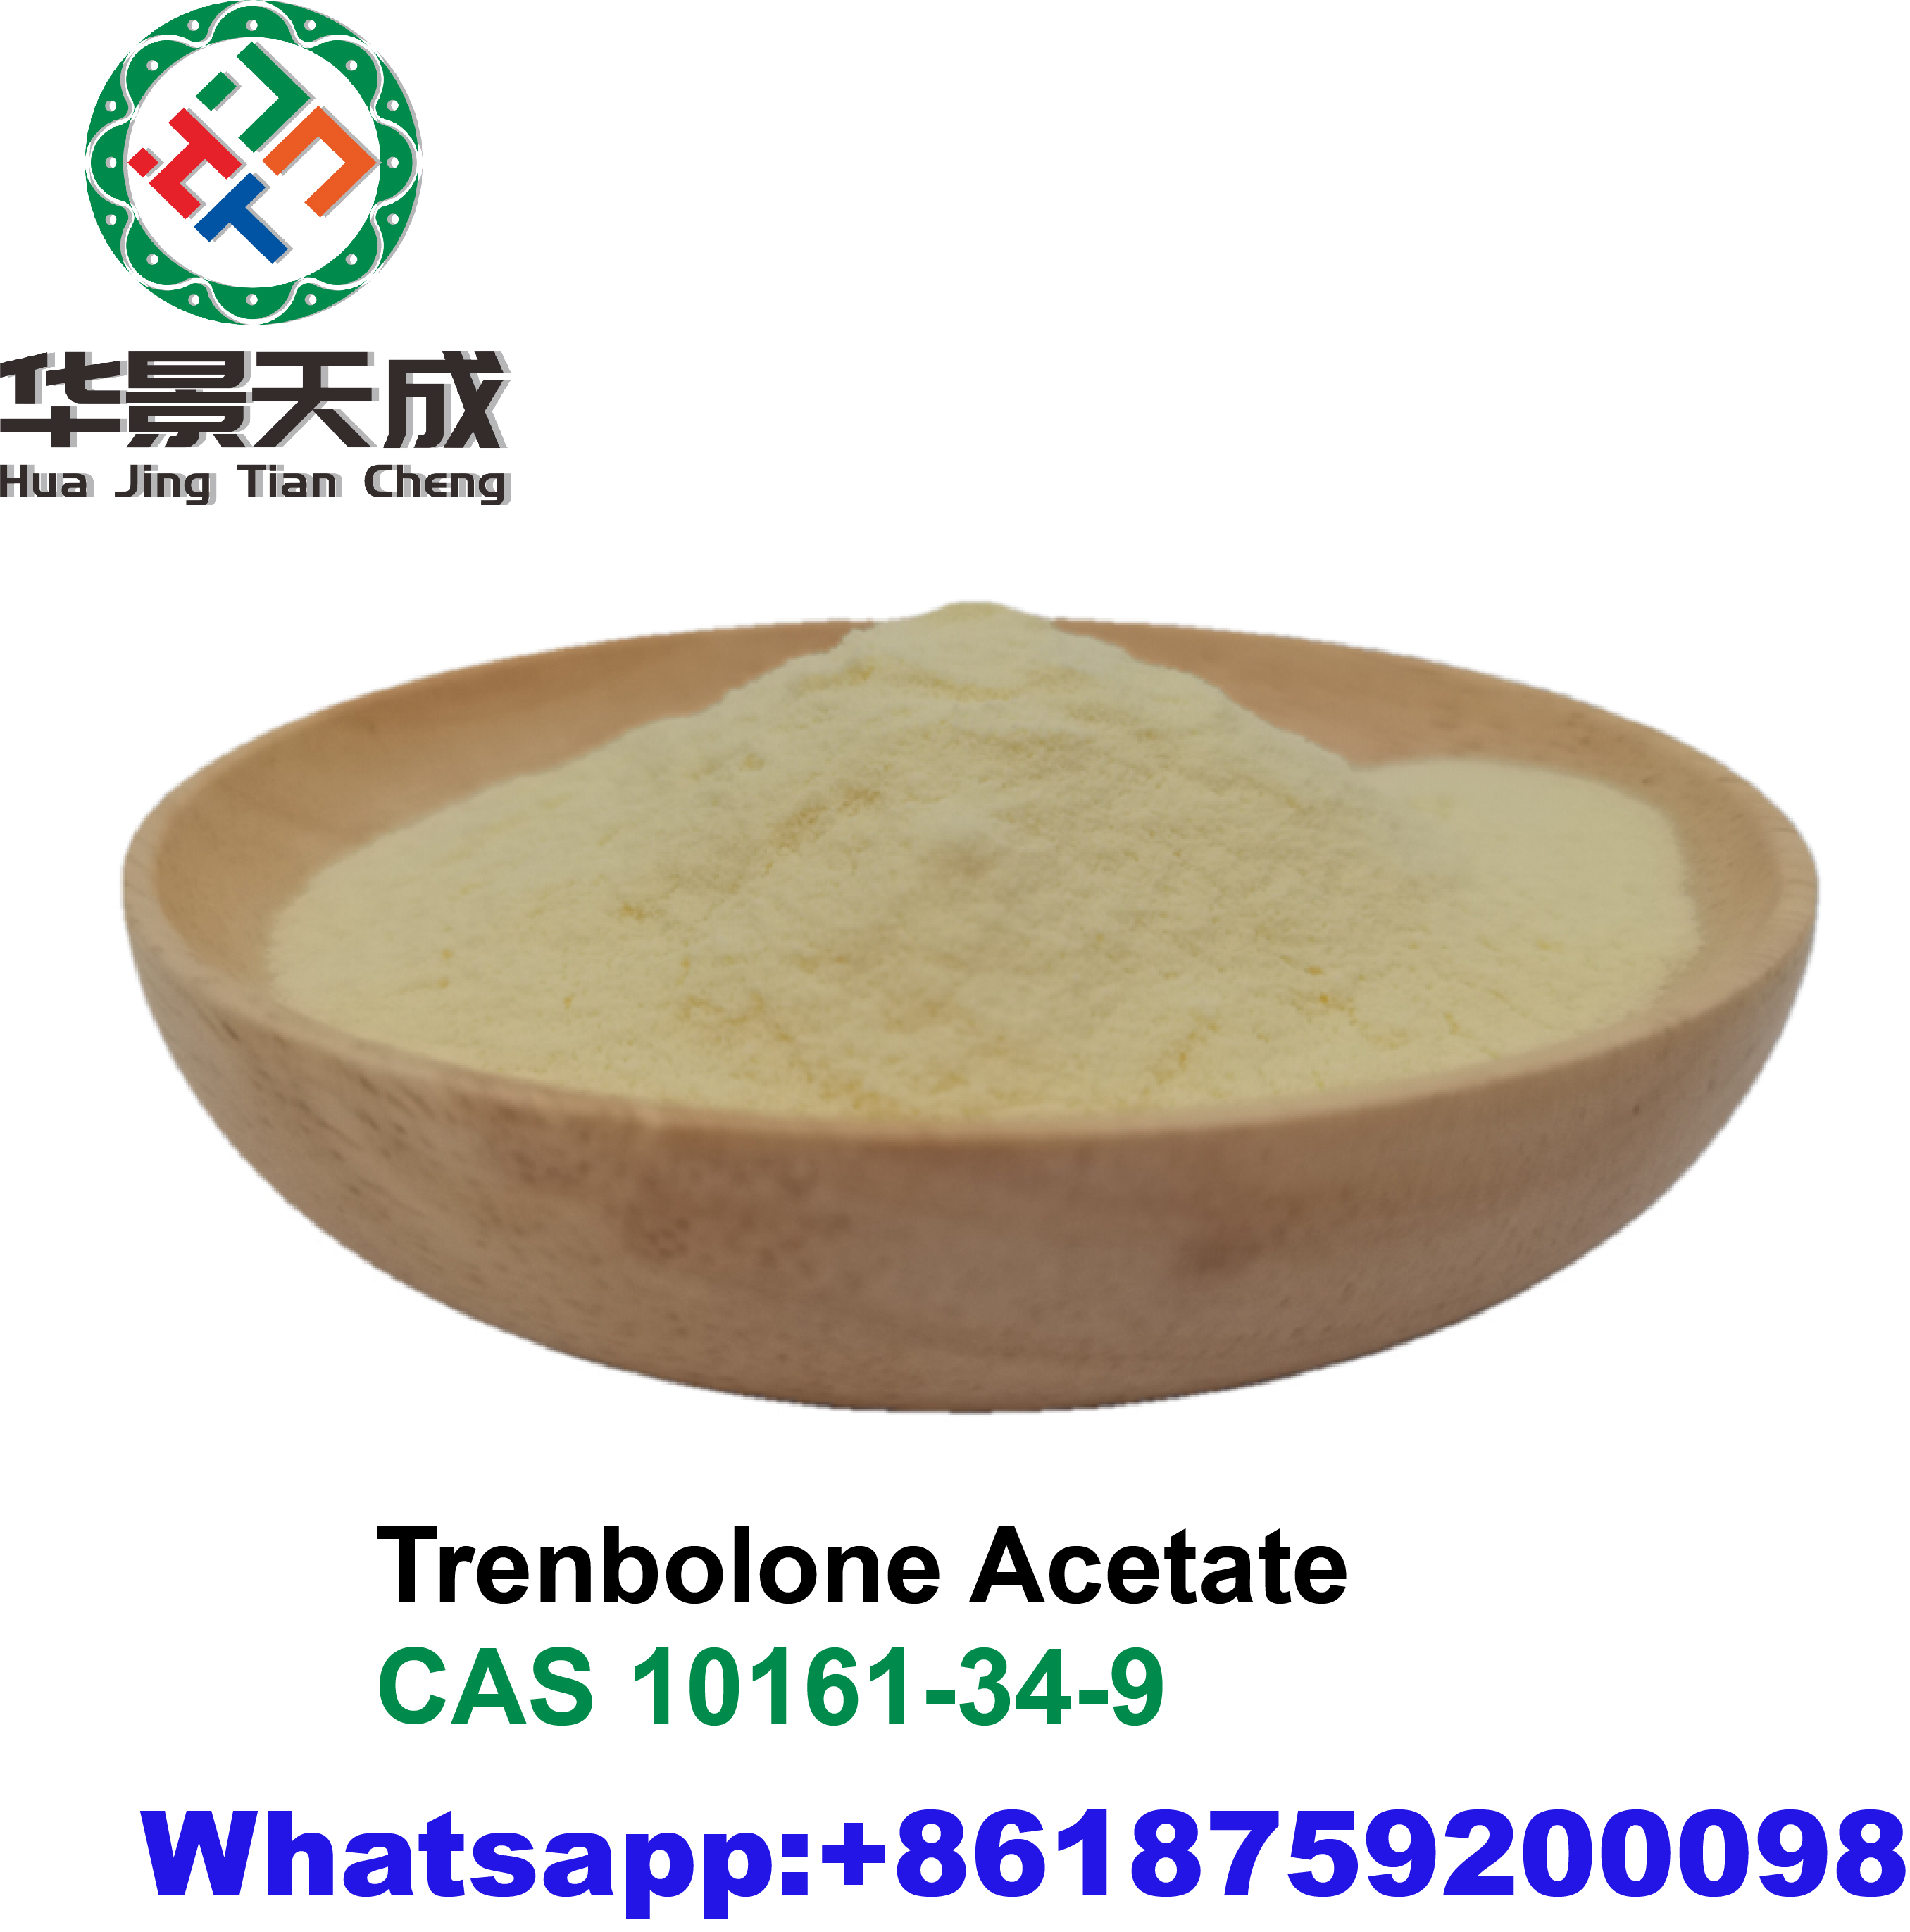 Fat Loss Androgenic Tren A Anabolic Steroids Bodybuilding Cutting Cycle Trenbolone Acetate Powder CasNO.10161-34-9 Featured Image